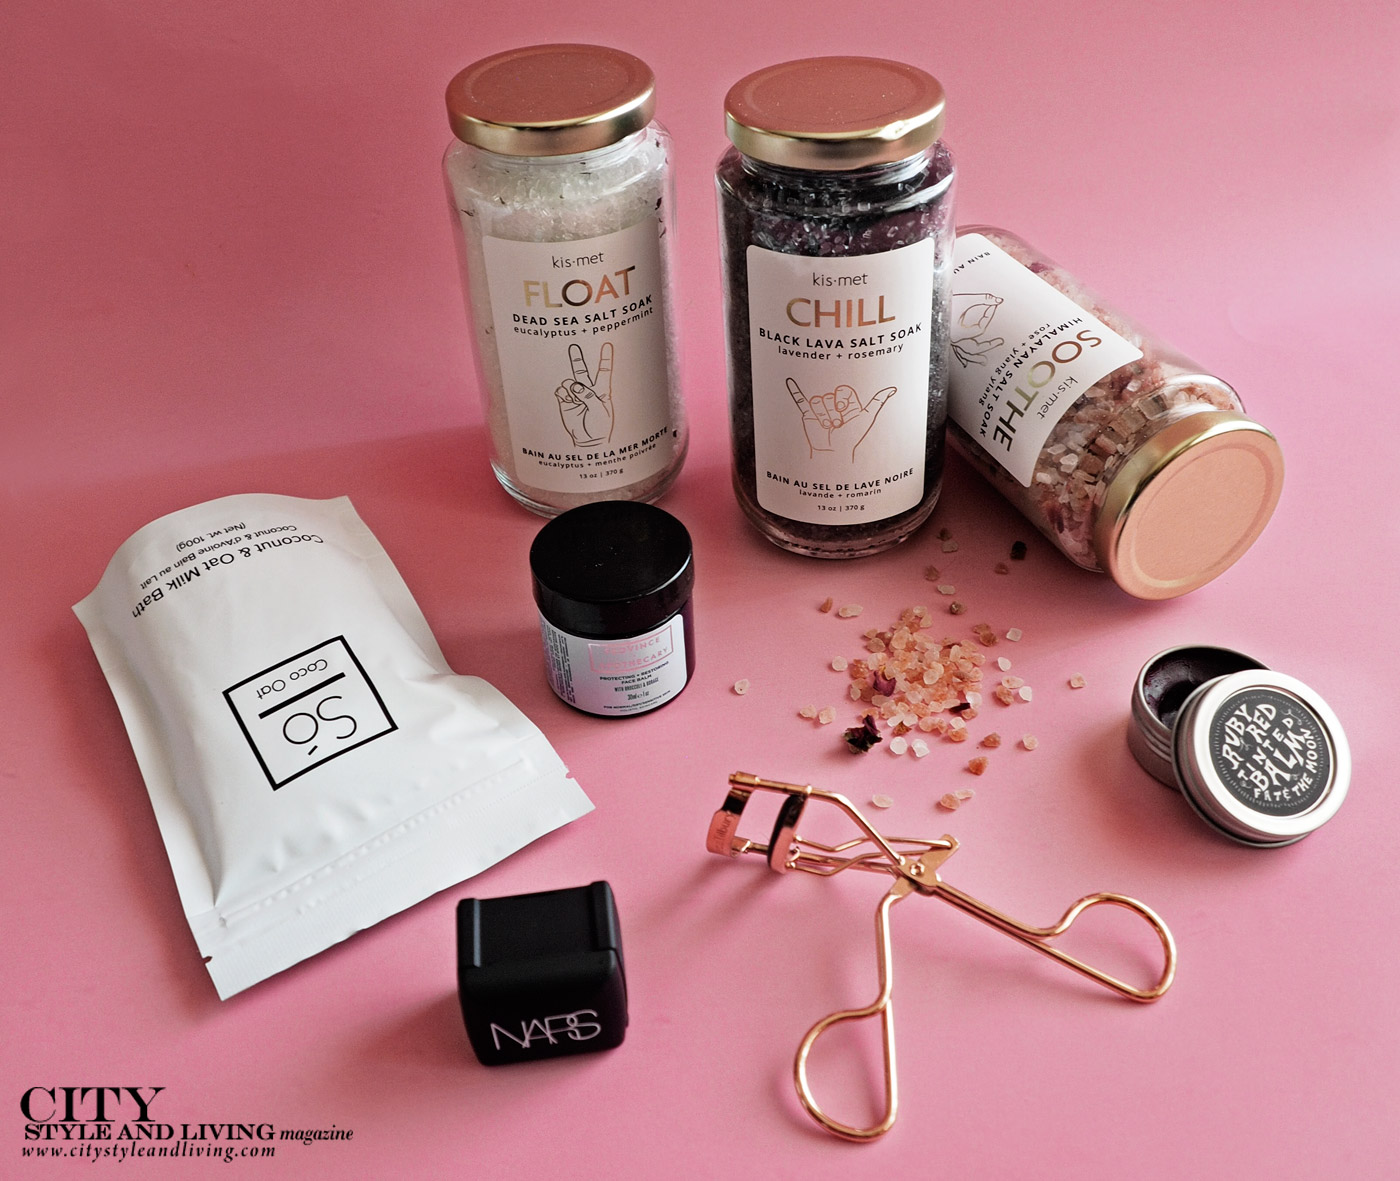 City Style and Living Magazine Spring 2019 Beauty Best products treasure trove